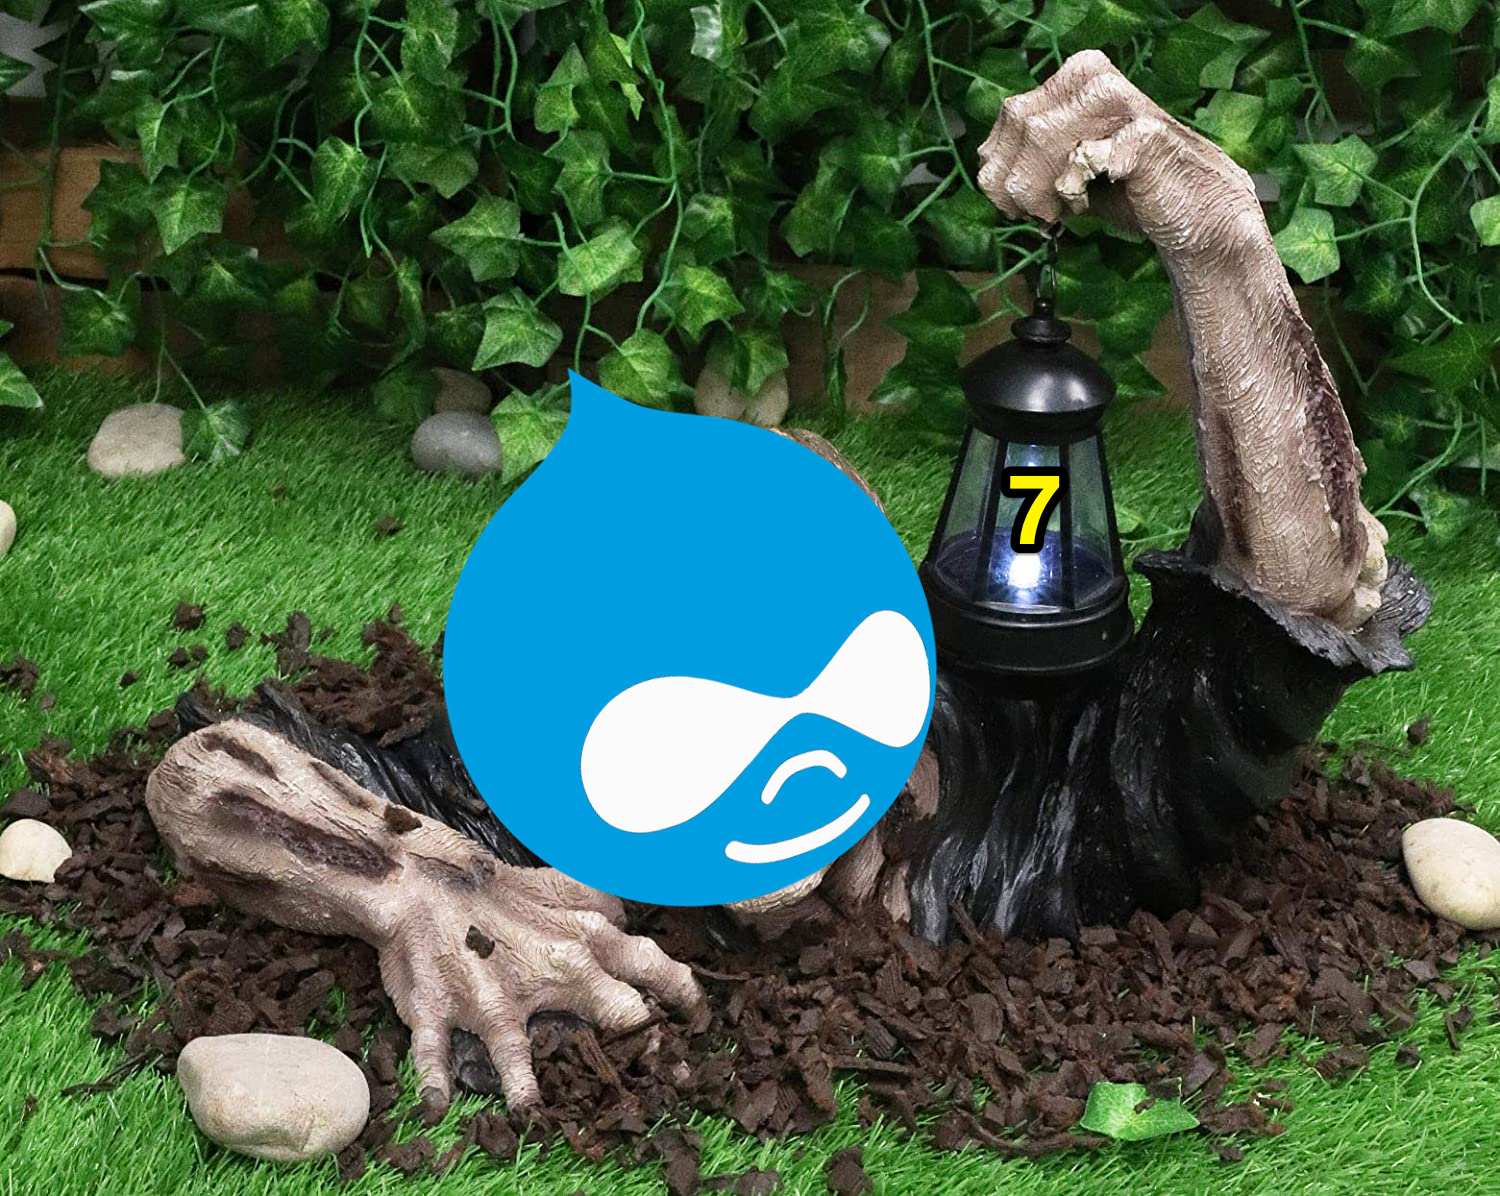 A blue Drupal logo badly photoshopped onto the head of a zombie coming out of a grave, holding a lantern with the number 7 on it.